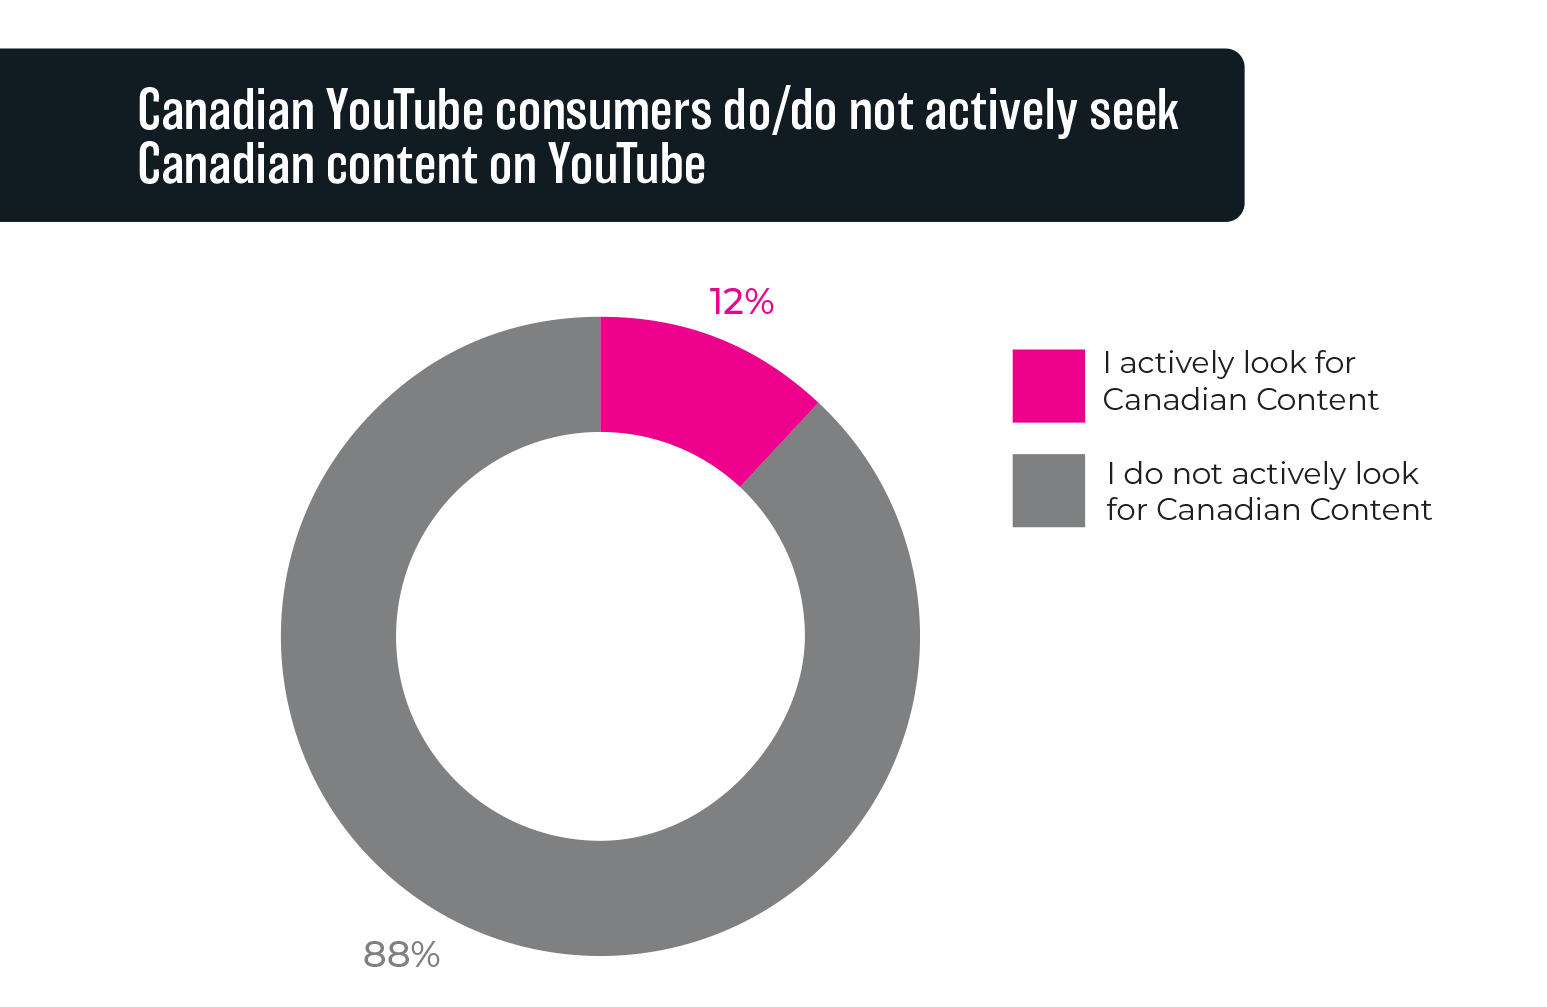 Figure 3.9: Canadian YouTube consumers do/do not actively seek Canadian content on YouTube